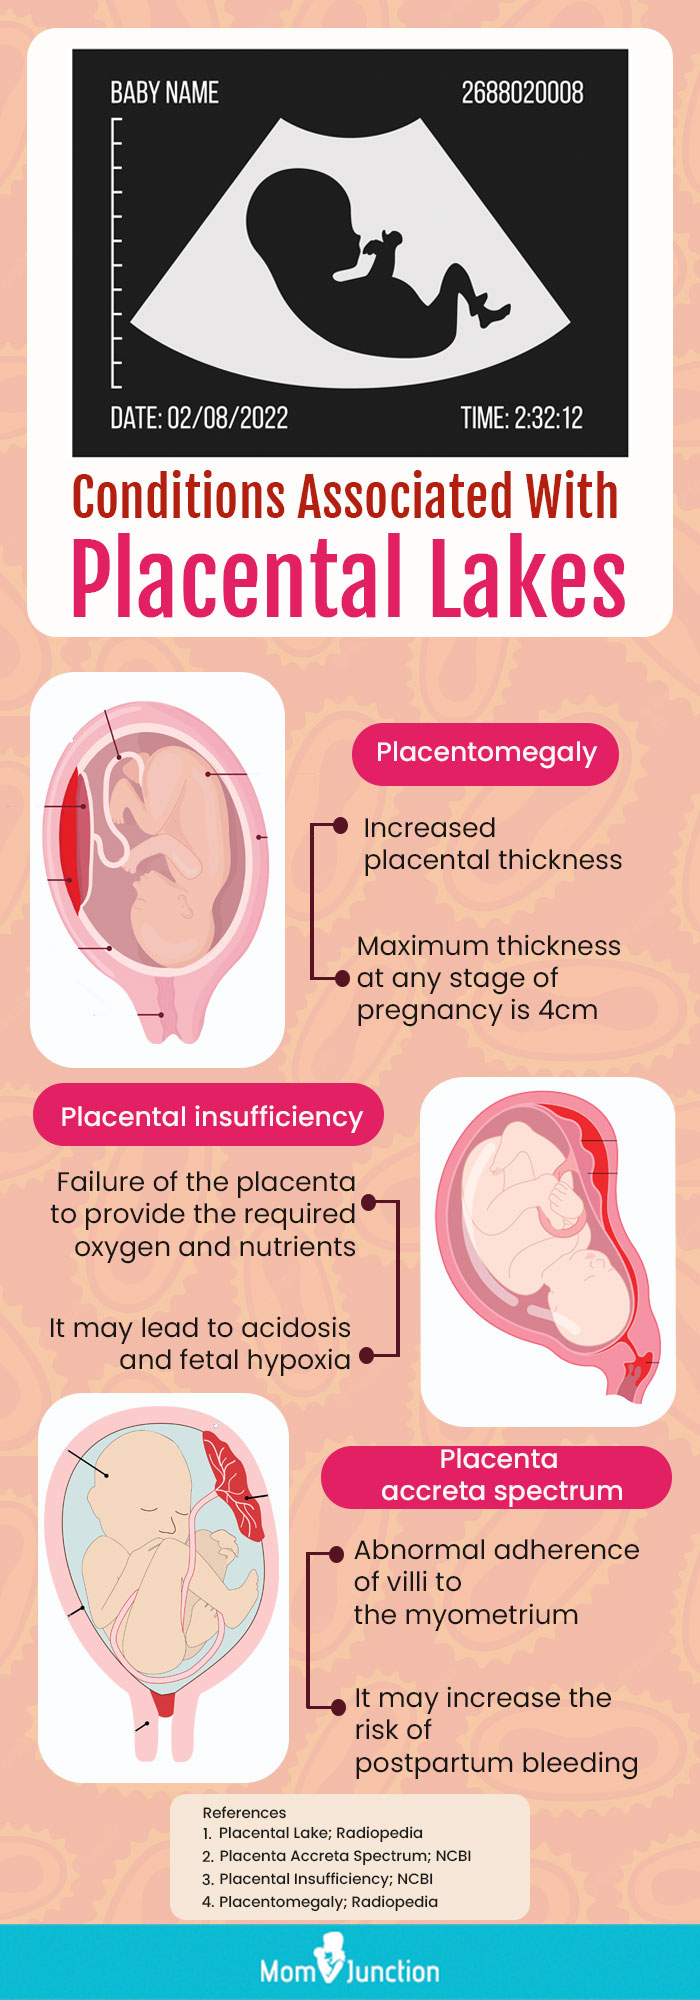 conditions associated with placental lakes [infographic]